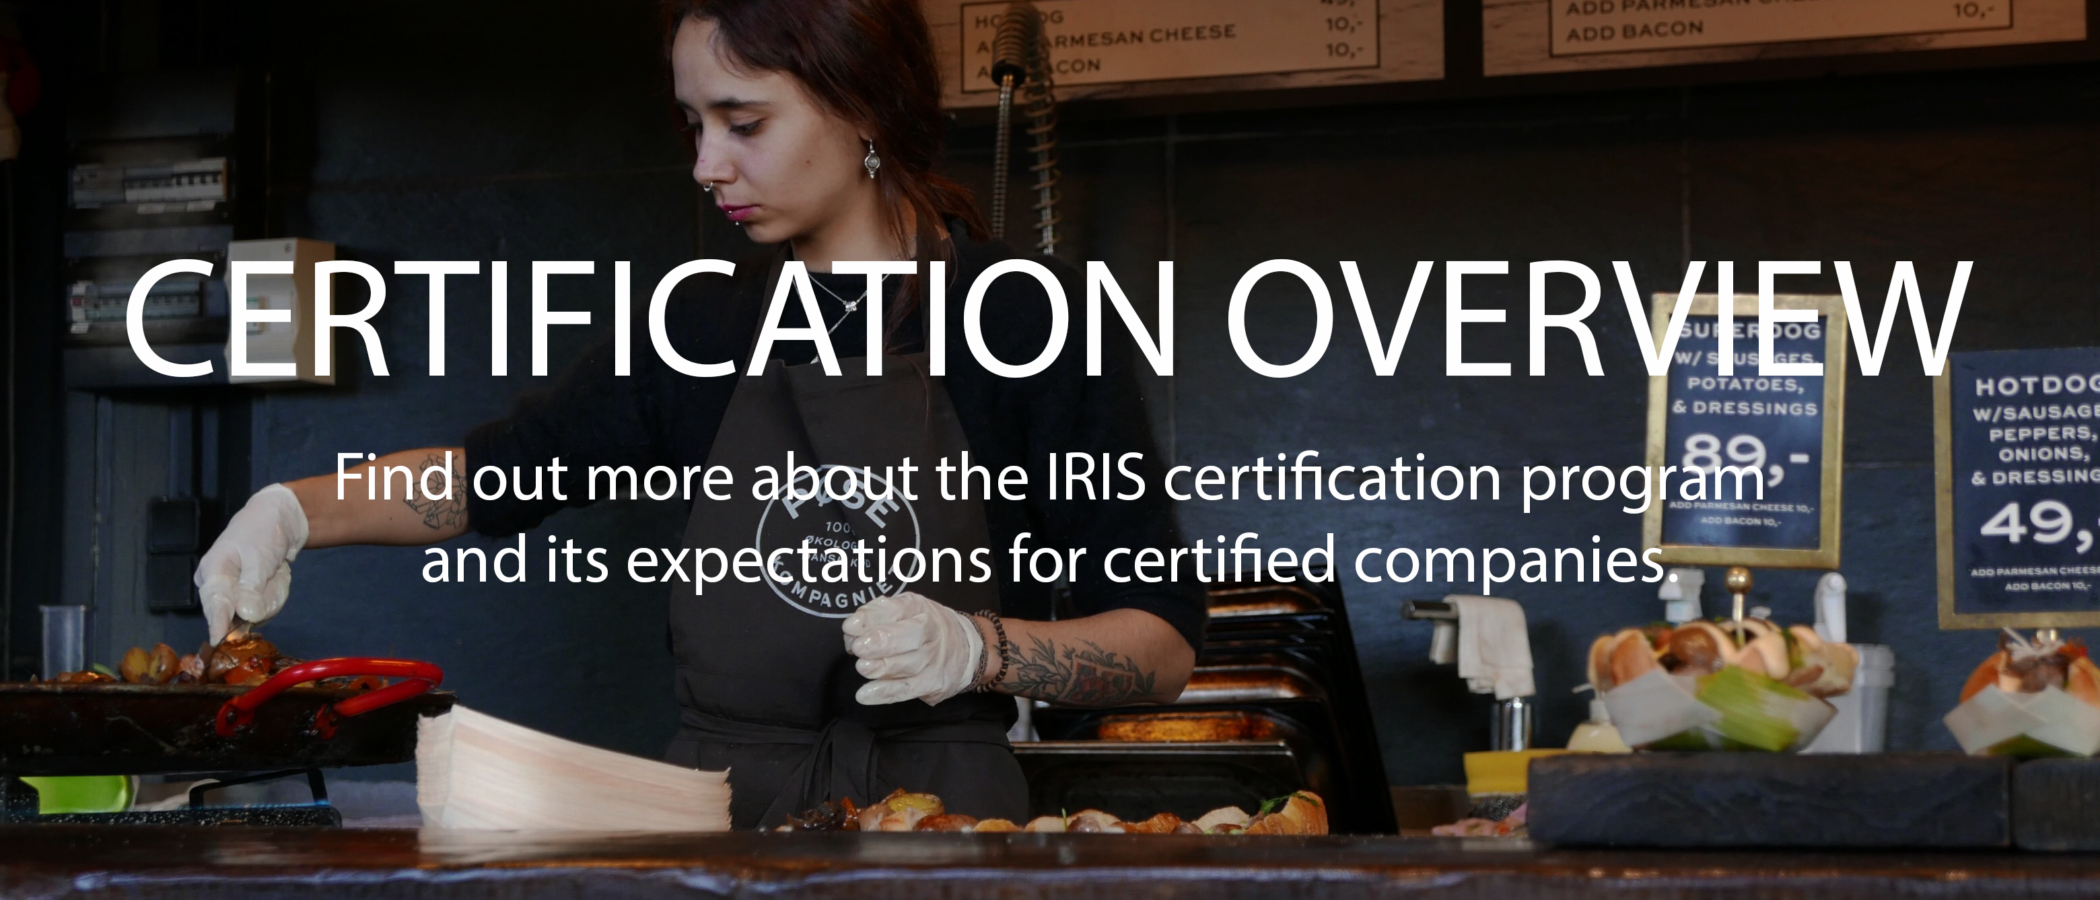 certification overview find out more about the IRIS certification program and its expectations for certified companies